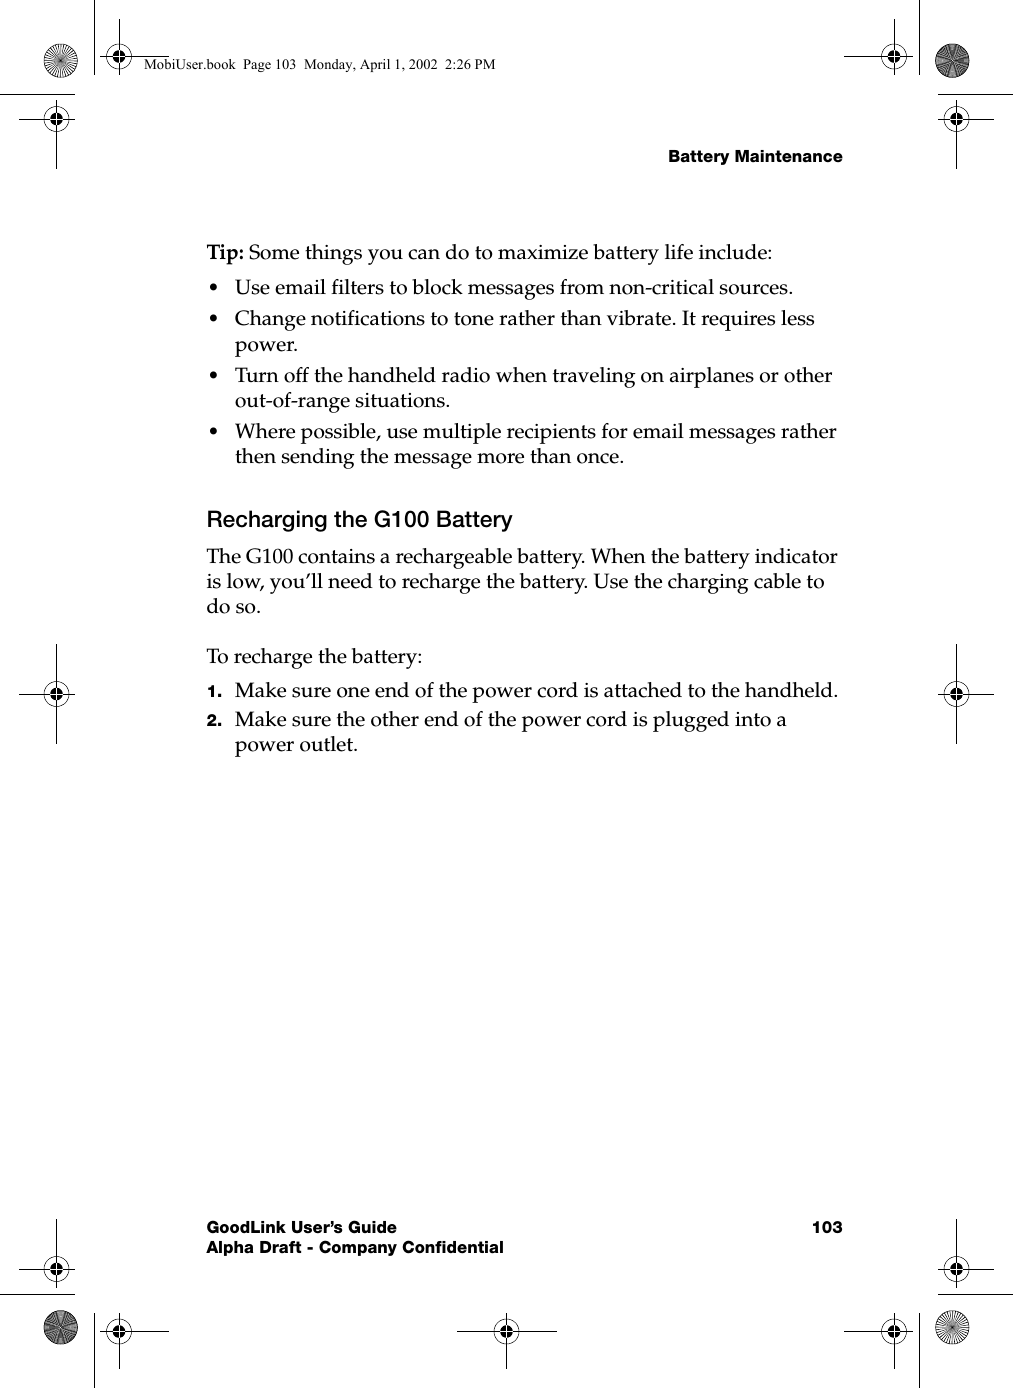 Battery MaintenanceGoodLink User’s Guide 103Alpha Draft - Company ConfidentialTip: Some things you can do to maximize battery life include:•Use email filters to block messages from non-critical sources.•Change notifications to tone rather than vibrate. It requires less power.•Turn off the handheld radio when traveling on airplanes or other out-of-range situations.•Where possible, use multiple recipients for email messages rather then sending the message more than once.Recharging the G100 BatteryThe G100 contains a rechargeable battery. When the battery indicator is low, you’ll need to recharge the battery. Use the charging cable to do so.To recharge the battery:1. Make sure one end of the power cord is attached to the handheld.2. Make sure the other end of the power cord is plugged into a power outlet.MobiUser.book  Page 103  Monday, April 1, 2002  2:26 PM